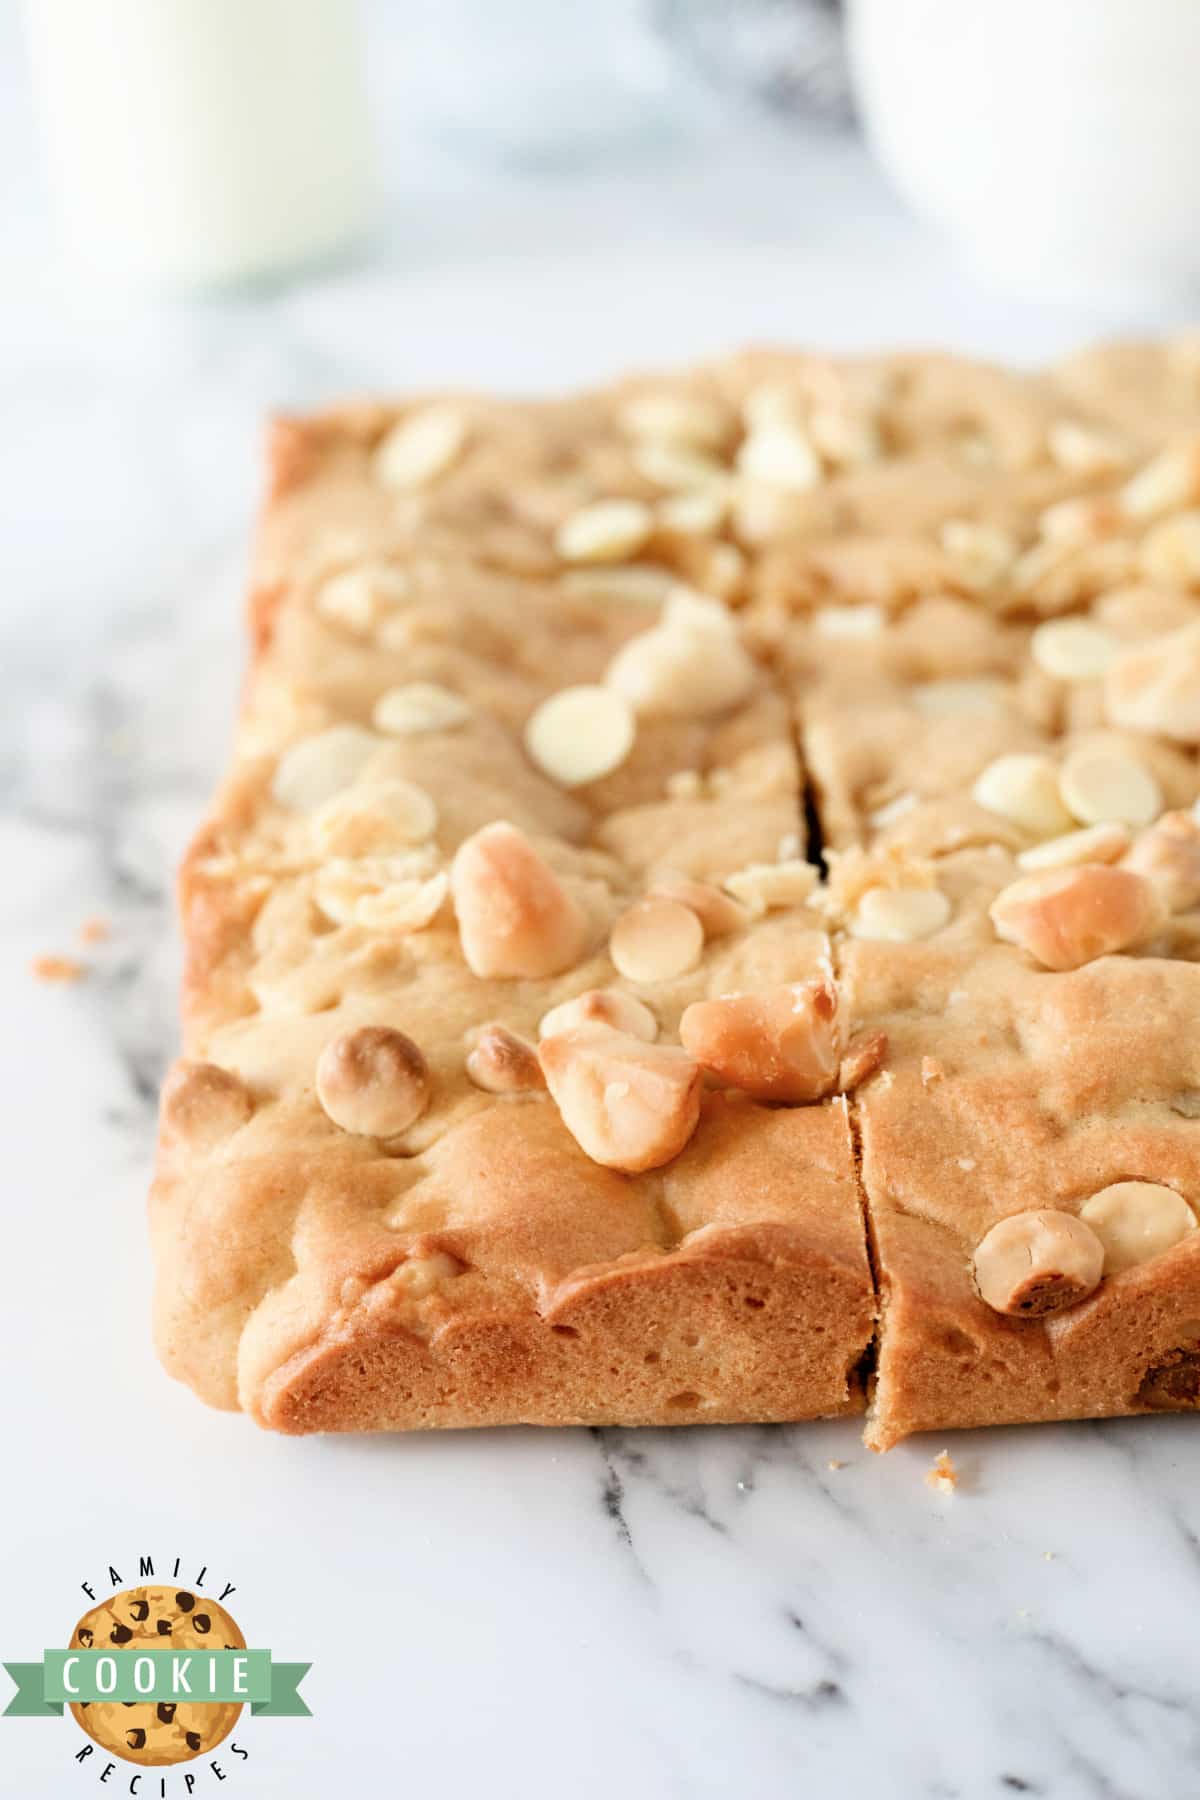 Cookie bars made with white chocolate chips and macadamia nuts